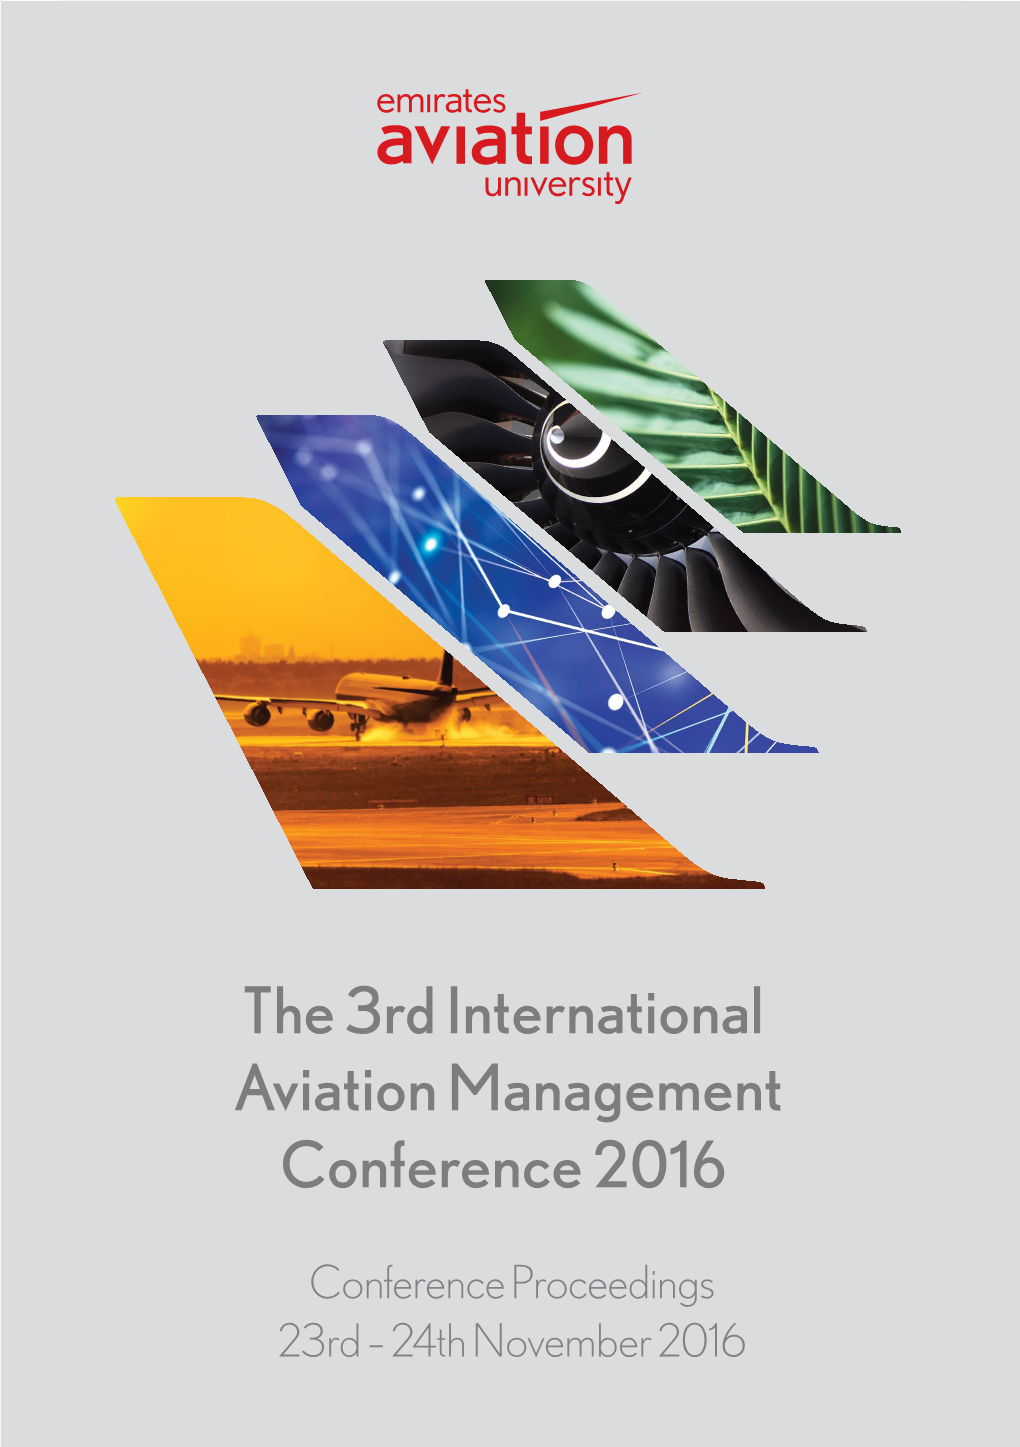 The 3Rd International Aviation Management Conference 2016